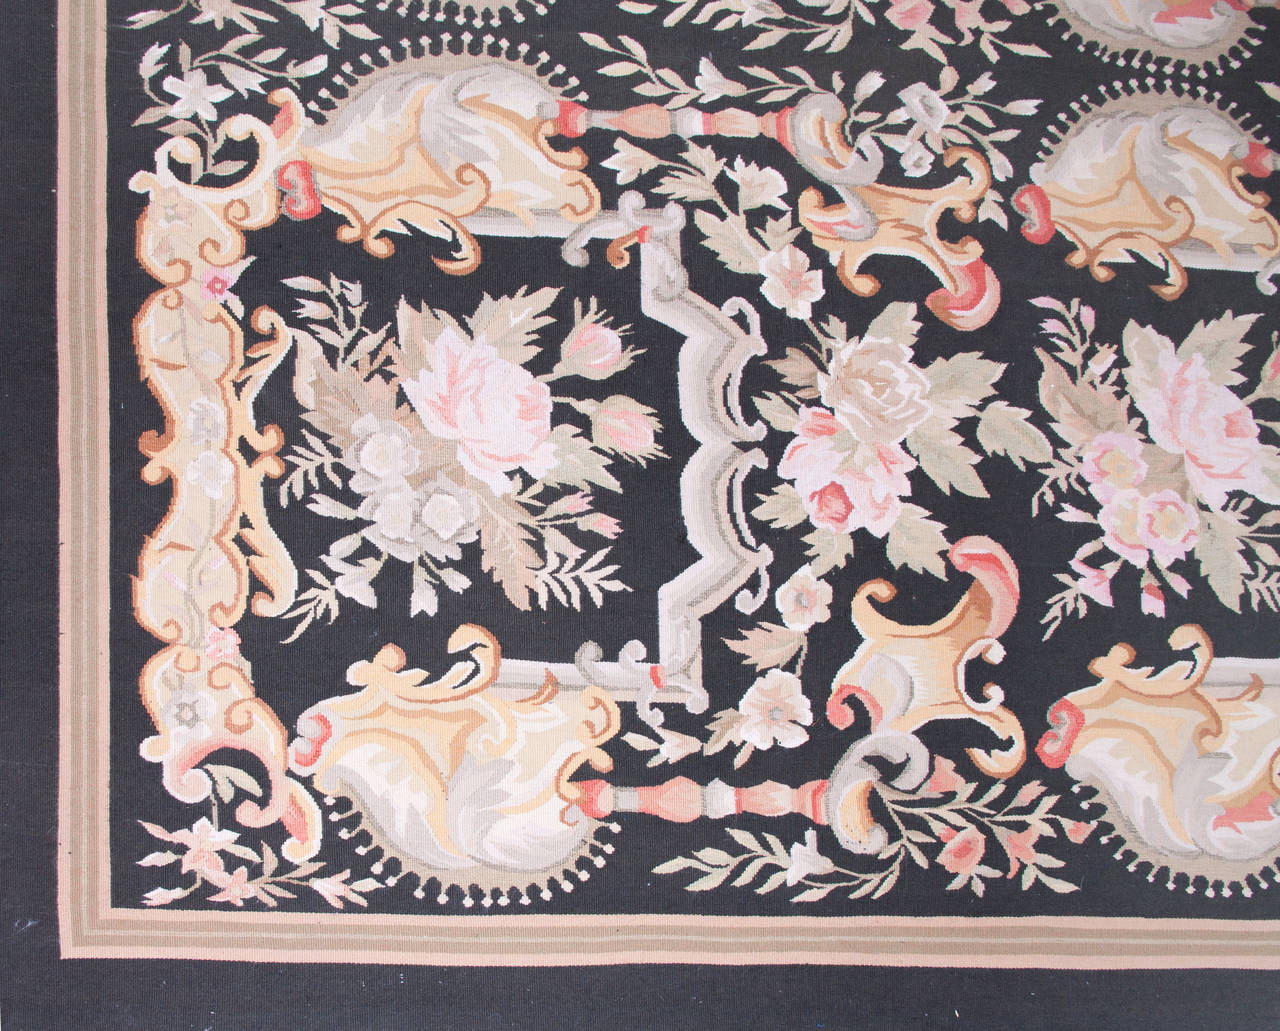 Hand-knotted rug with roses and acanthus leaves. Beautiful tan, taupe, rose colors with a light tan striped border. Spindle-framed floral has Victorian flair.